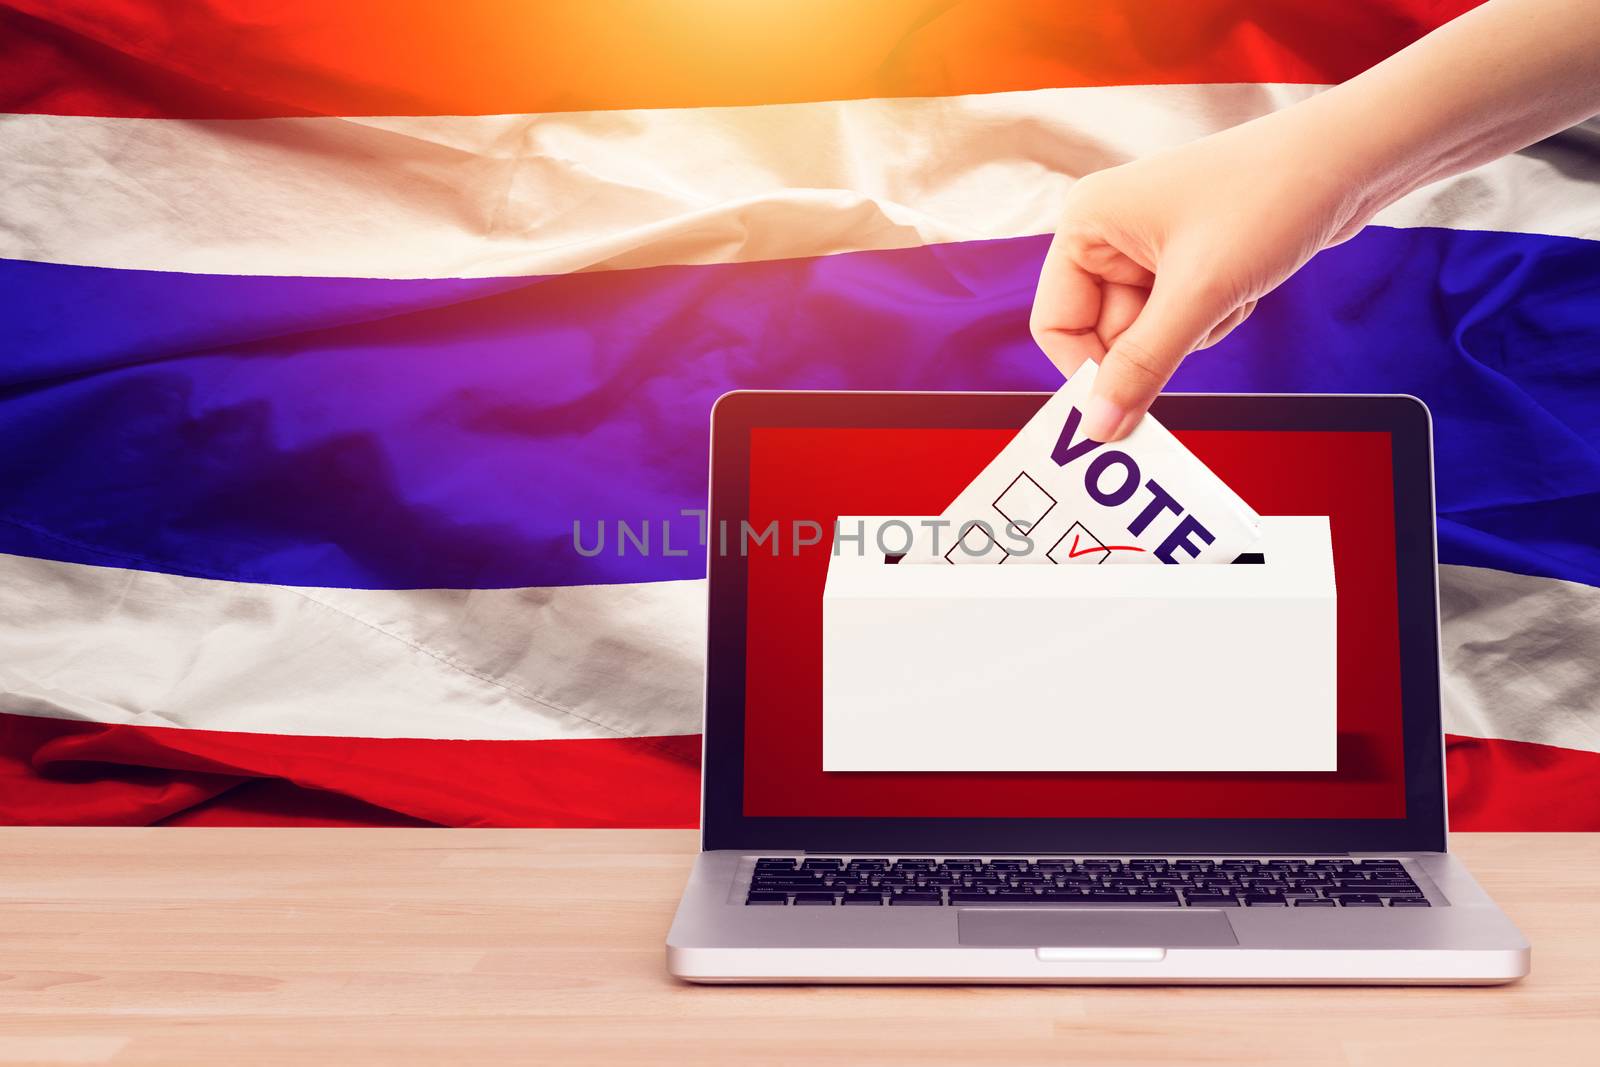 online vote , poll, exit poll for Thailand general election concept. close up hand of a person casting a ballot at elections during voting on canvas Thailand flag background. by asiandelight